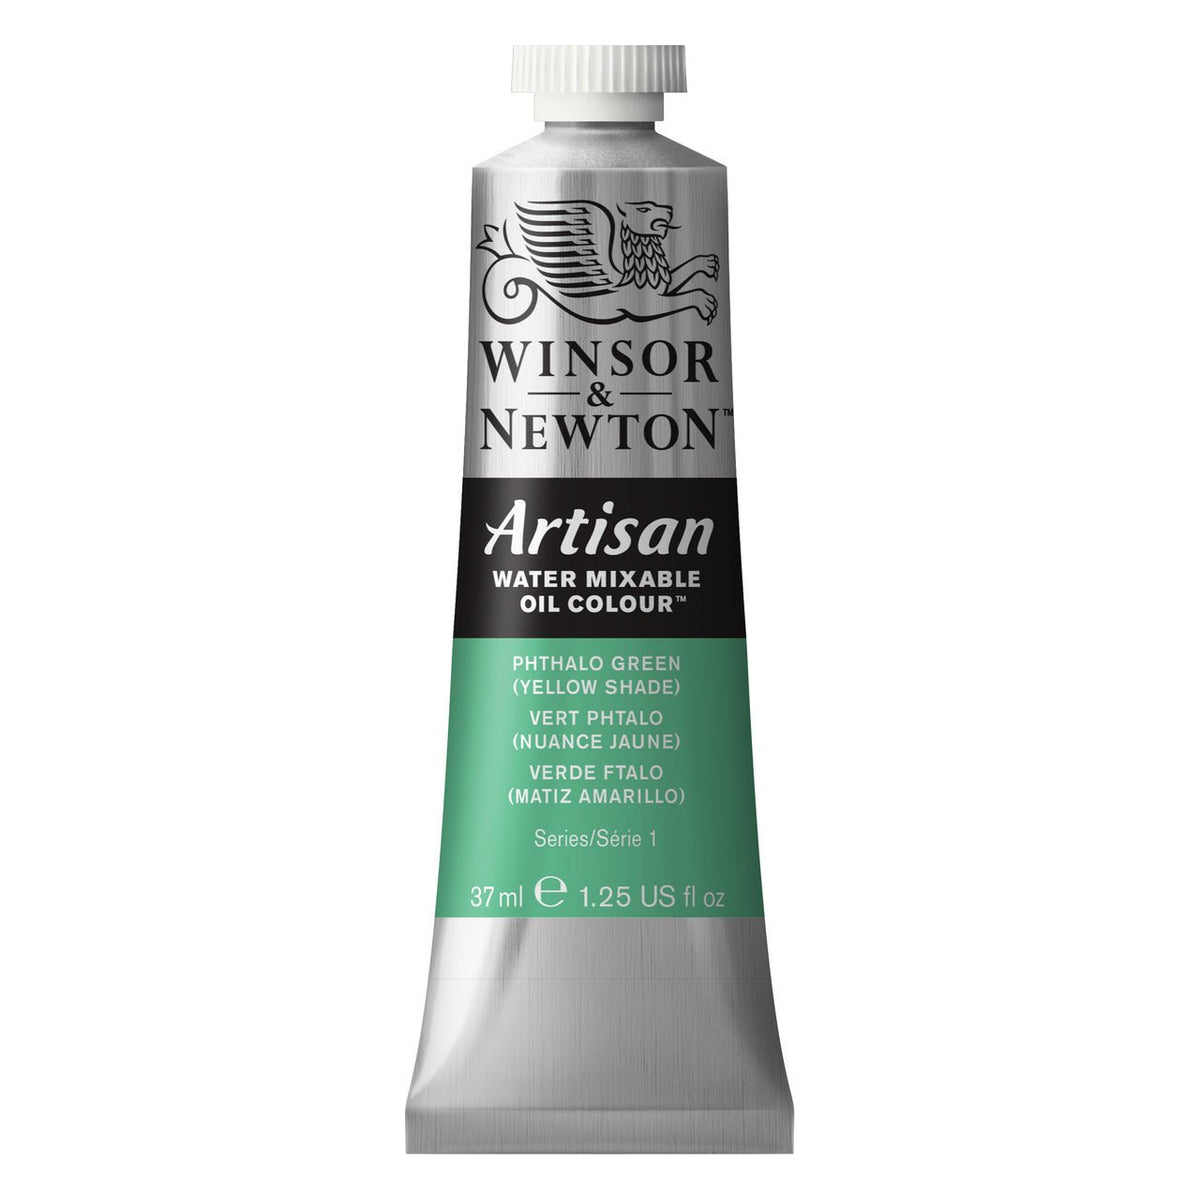 Winsor & Newton Artisan Water Mixable Oil 37ml - Phthalo Green (Yellow Shade) - merriartist.com